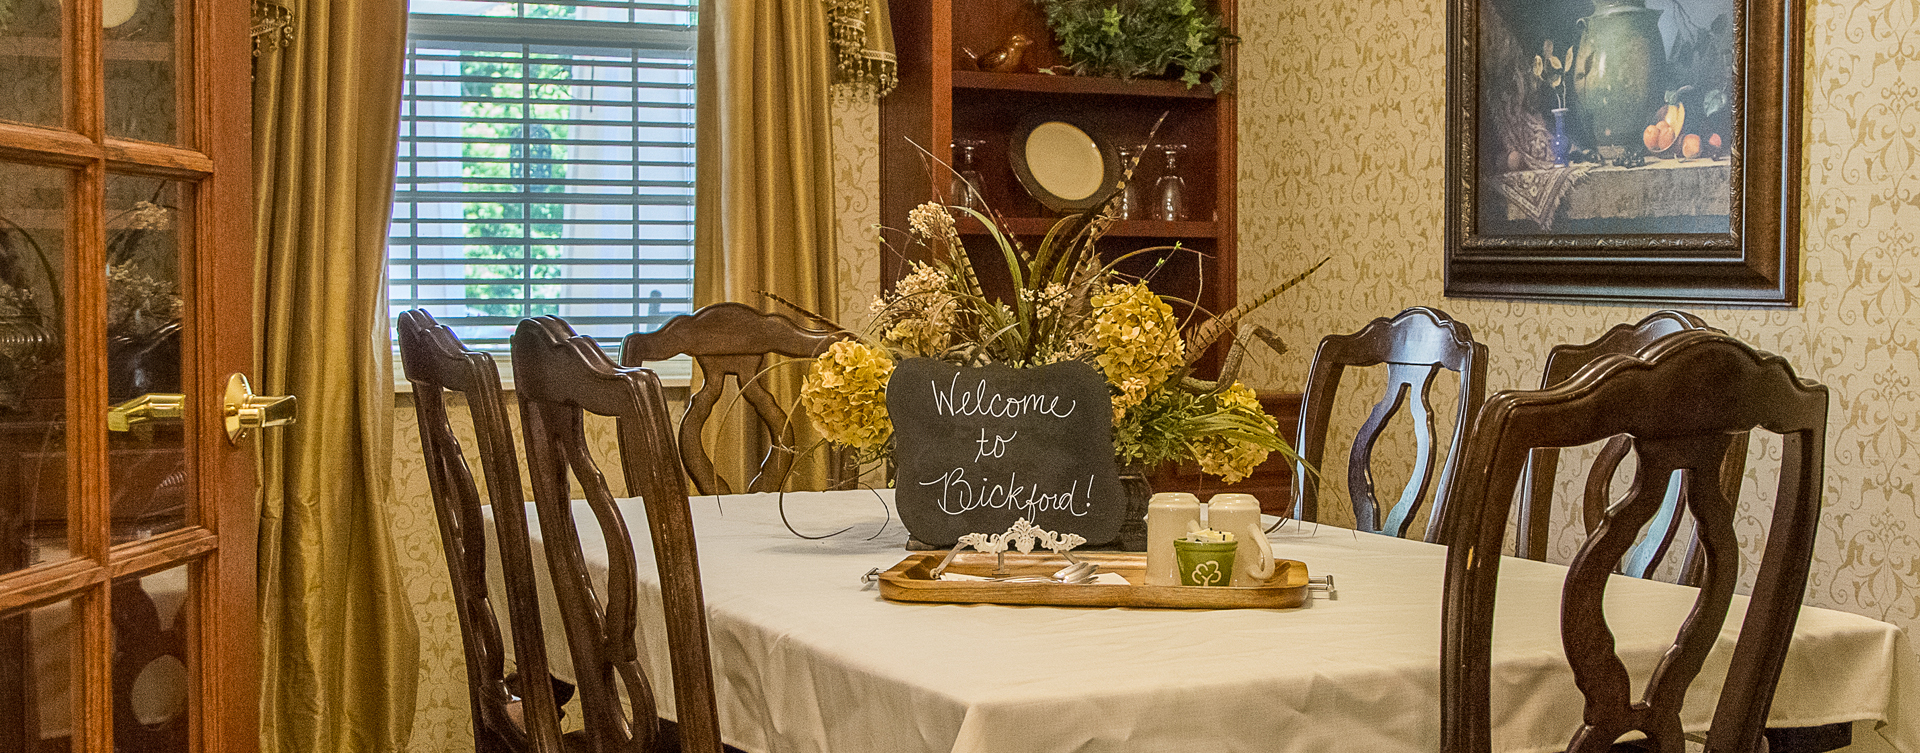 Celebrate special occasions in the private dining room at Bickford of Moline